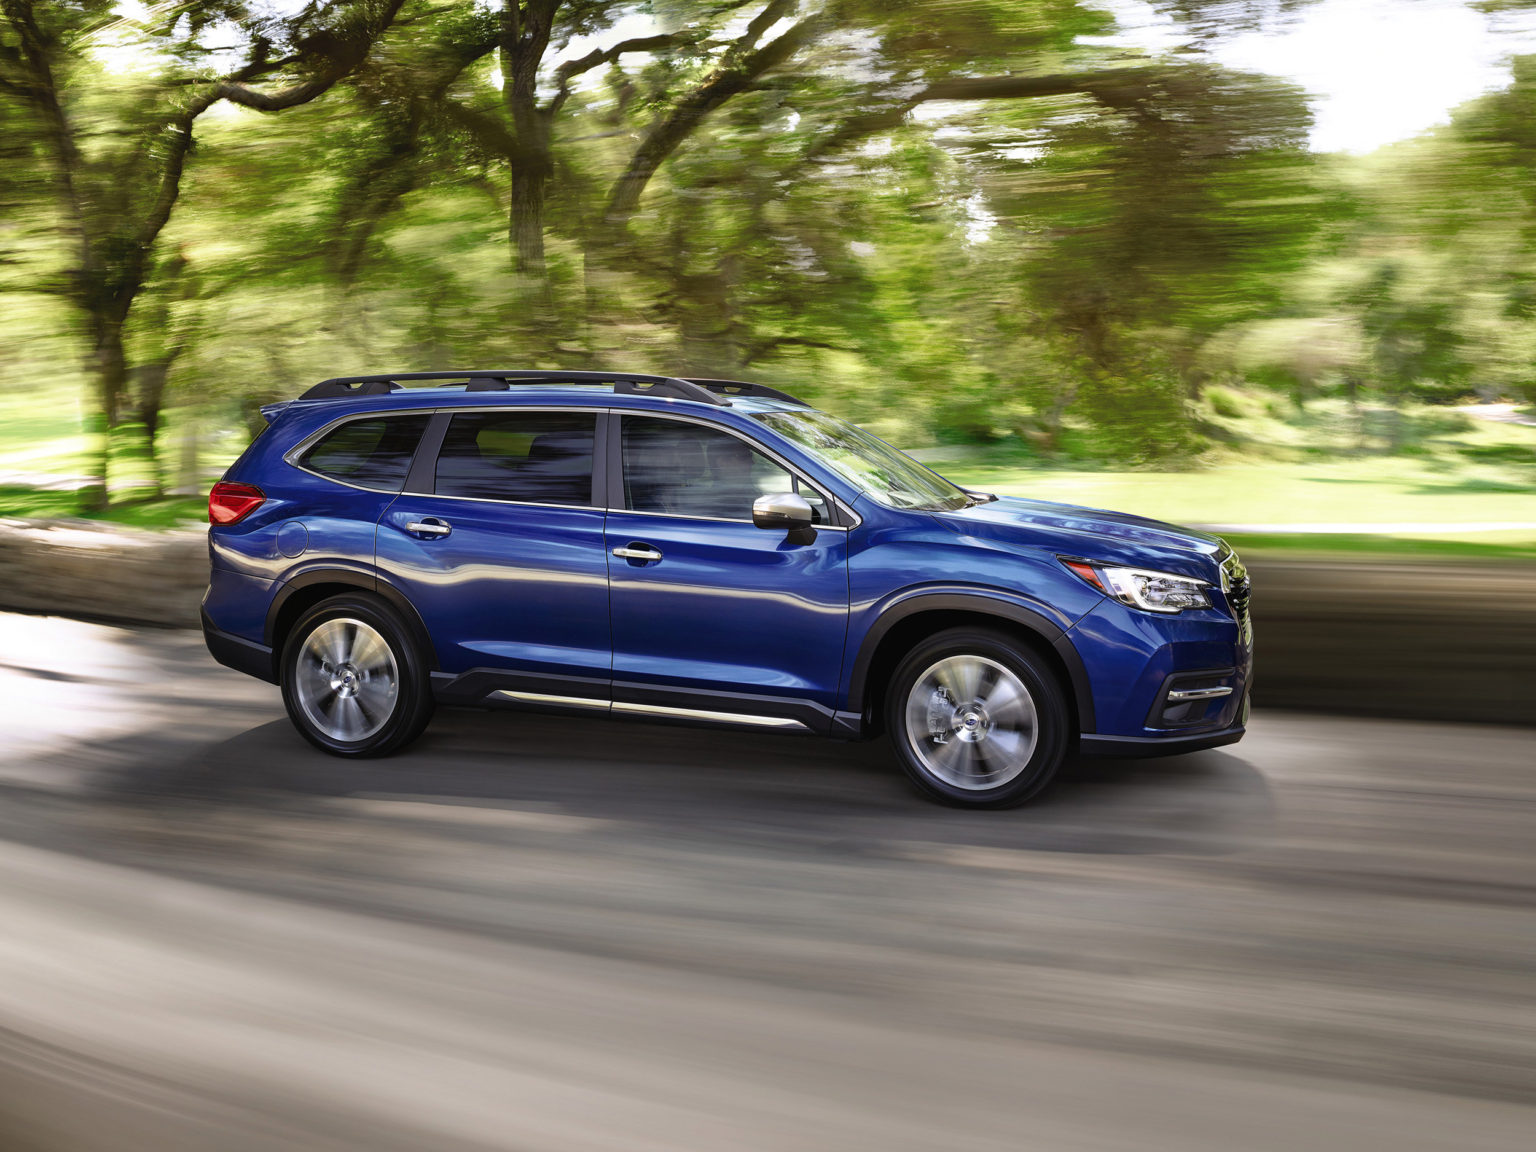 Subaru sells the 2021 Ascent in four different trim levels.